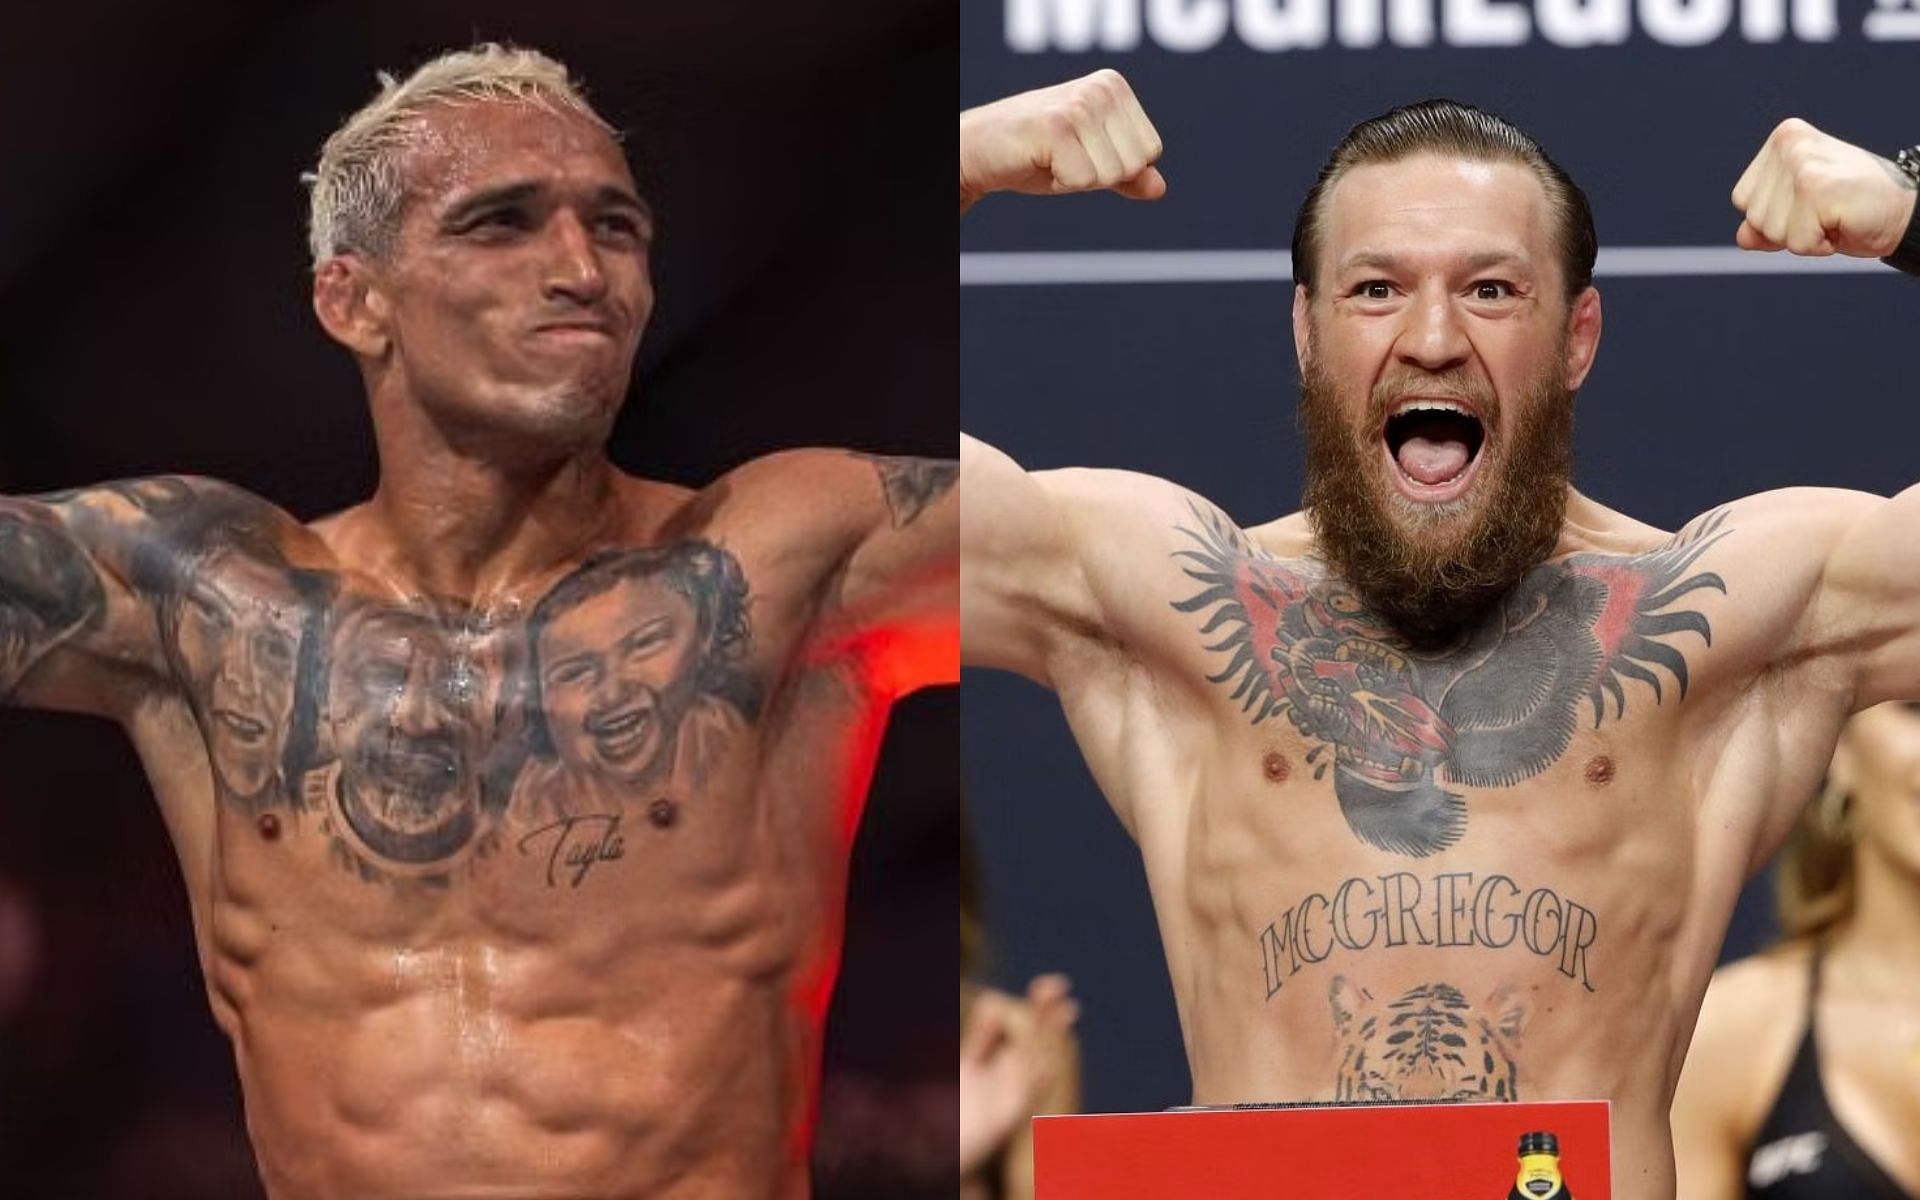 Charles Oliveira states that Conor McGregor is wise enough to avoid fighting him [Image courtesy: Getty Images]